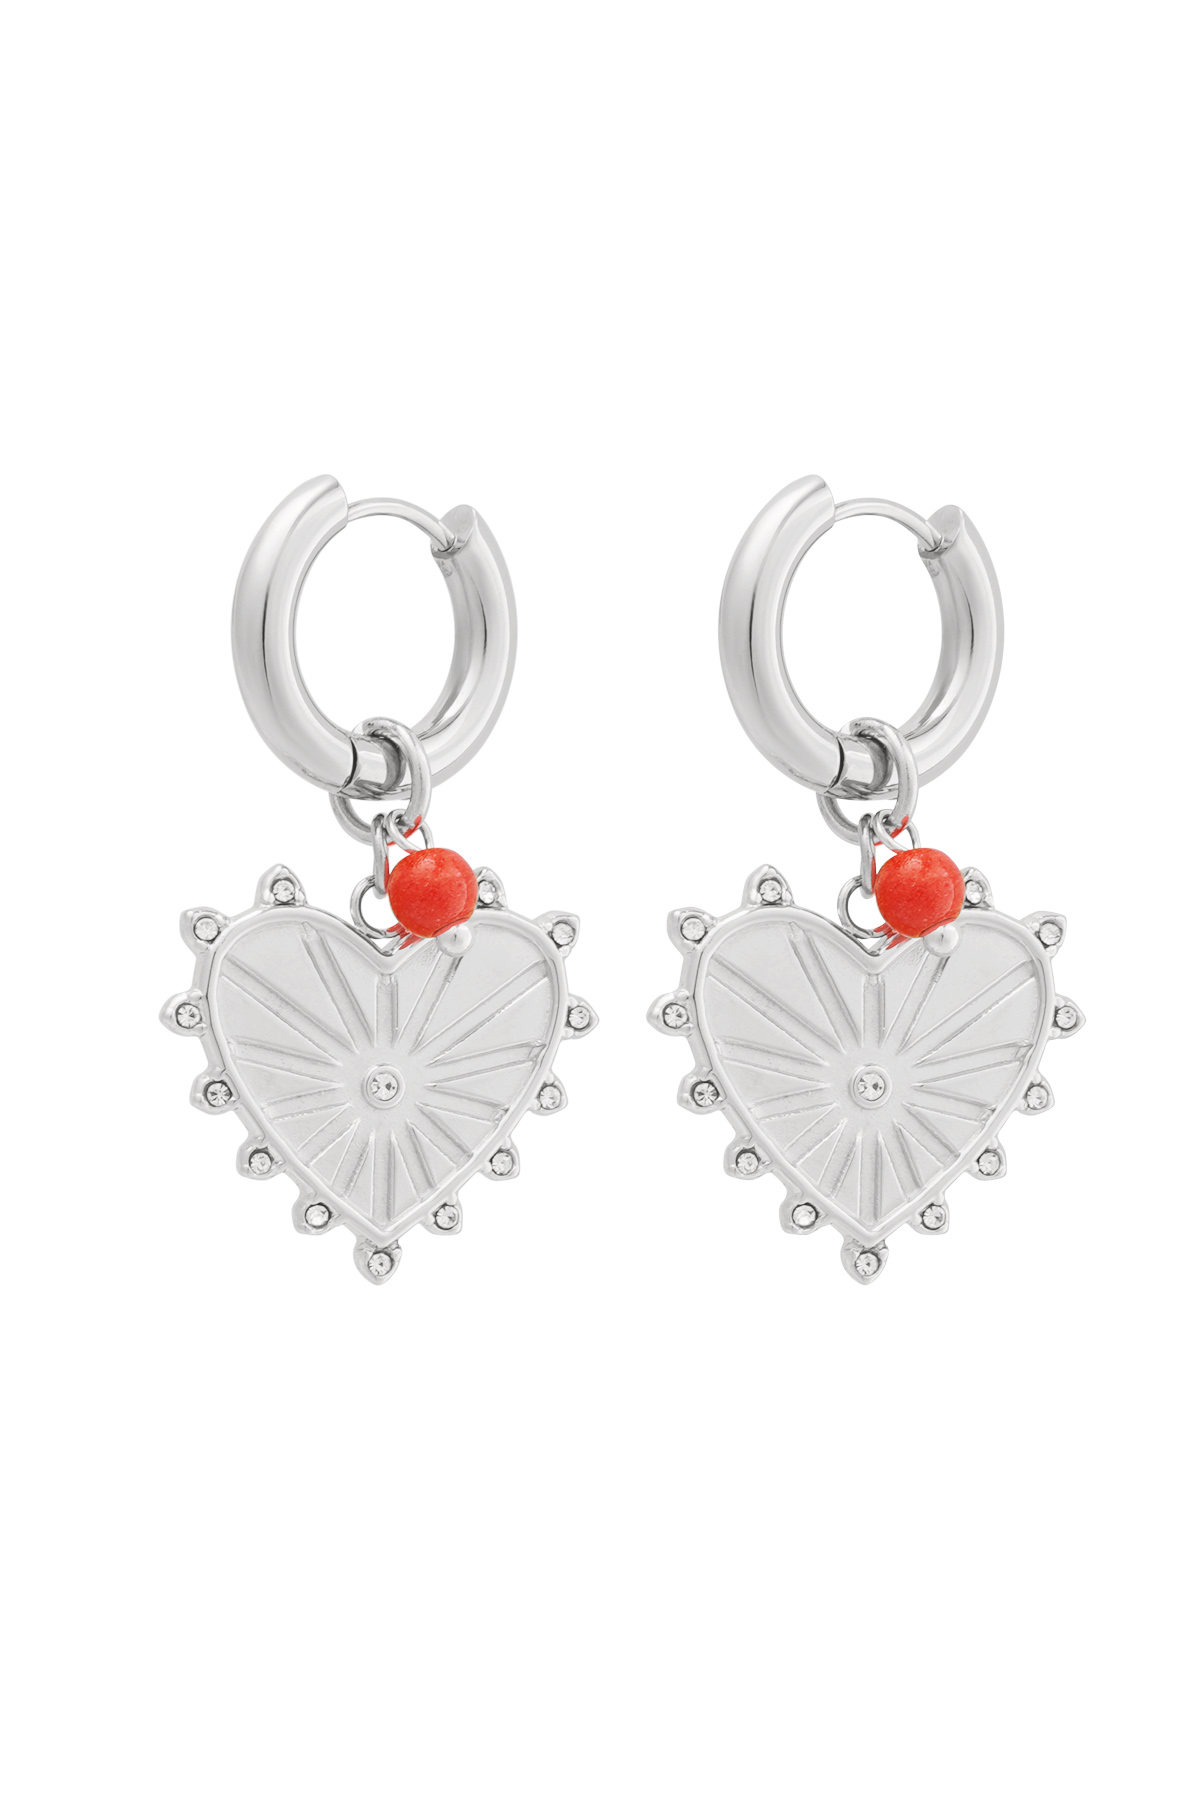 Earrings heart with spikes - silver h5 